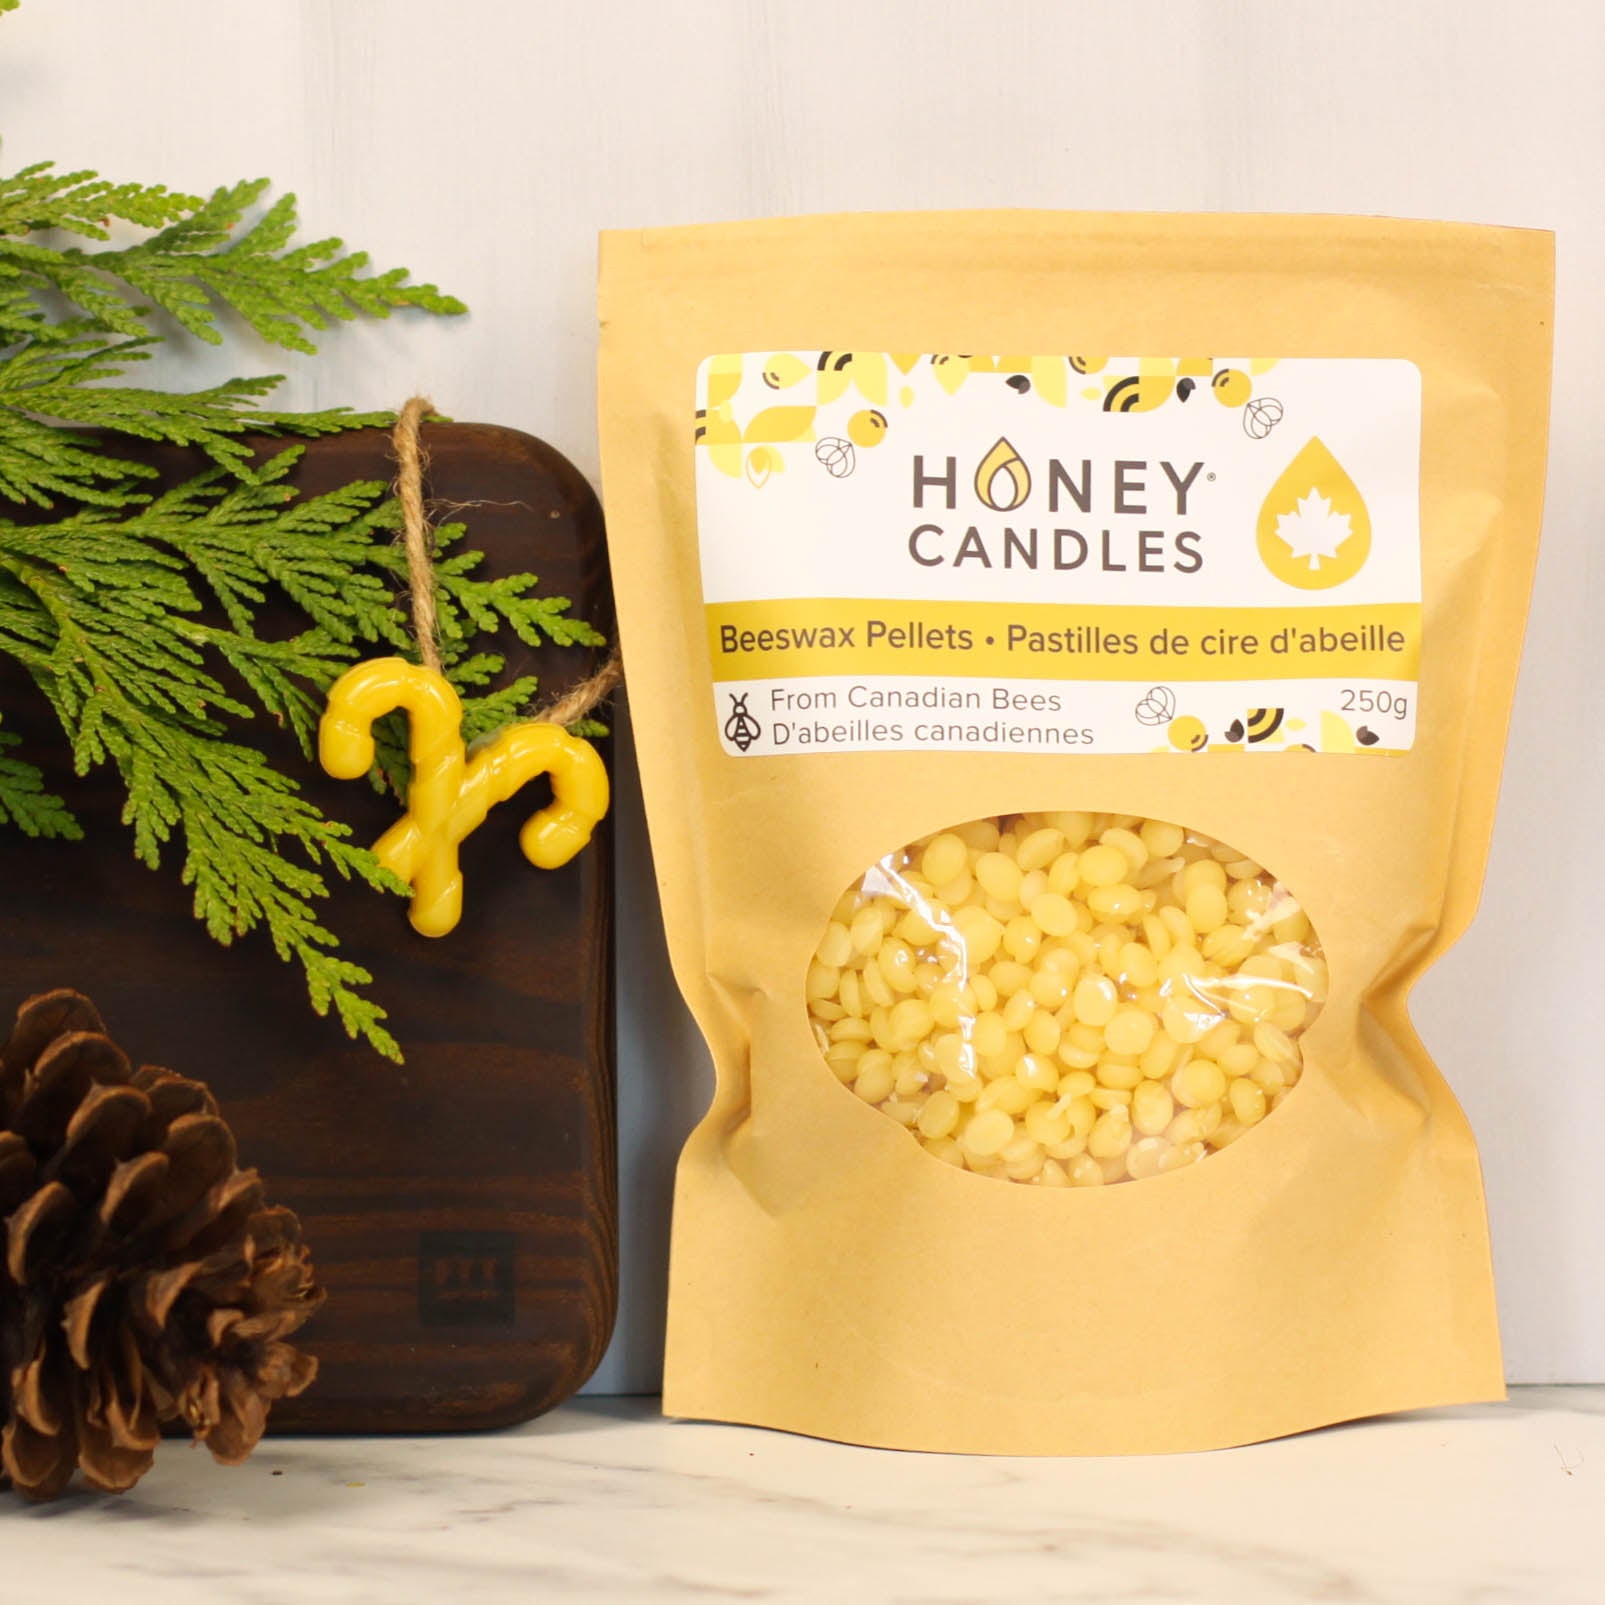 Beeswax and Honey Candle Project